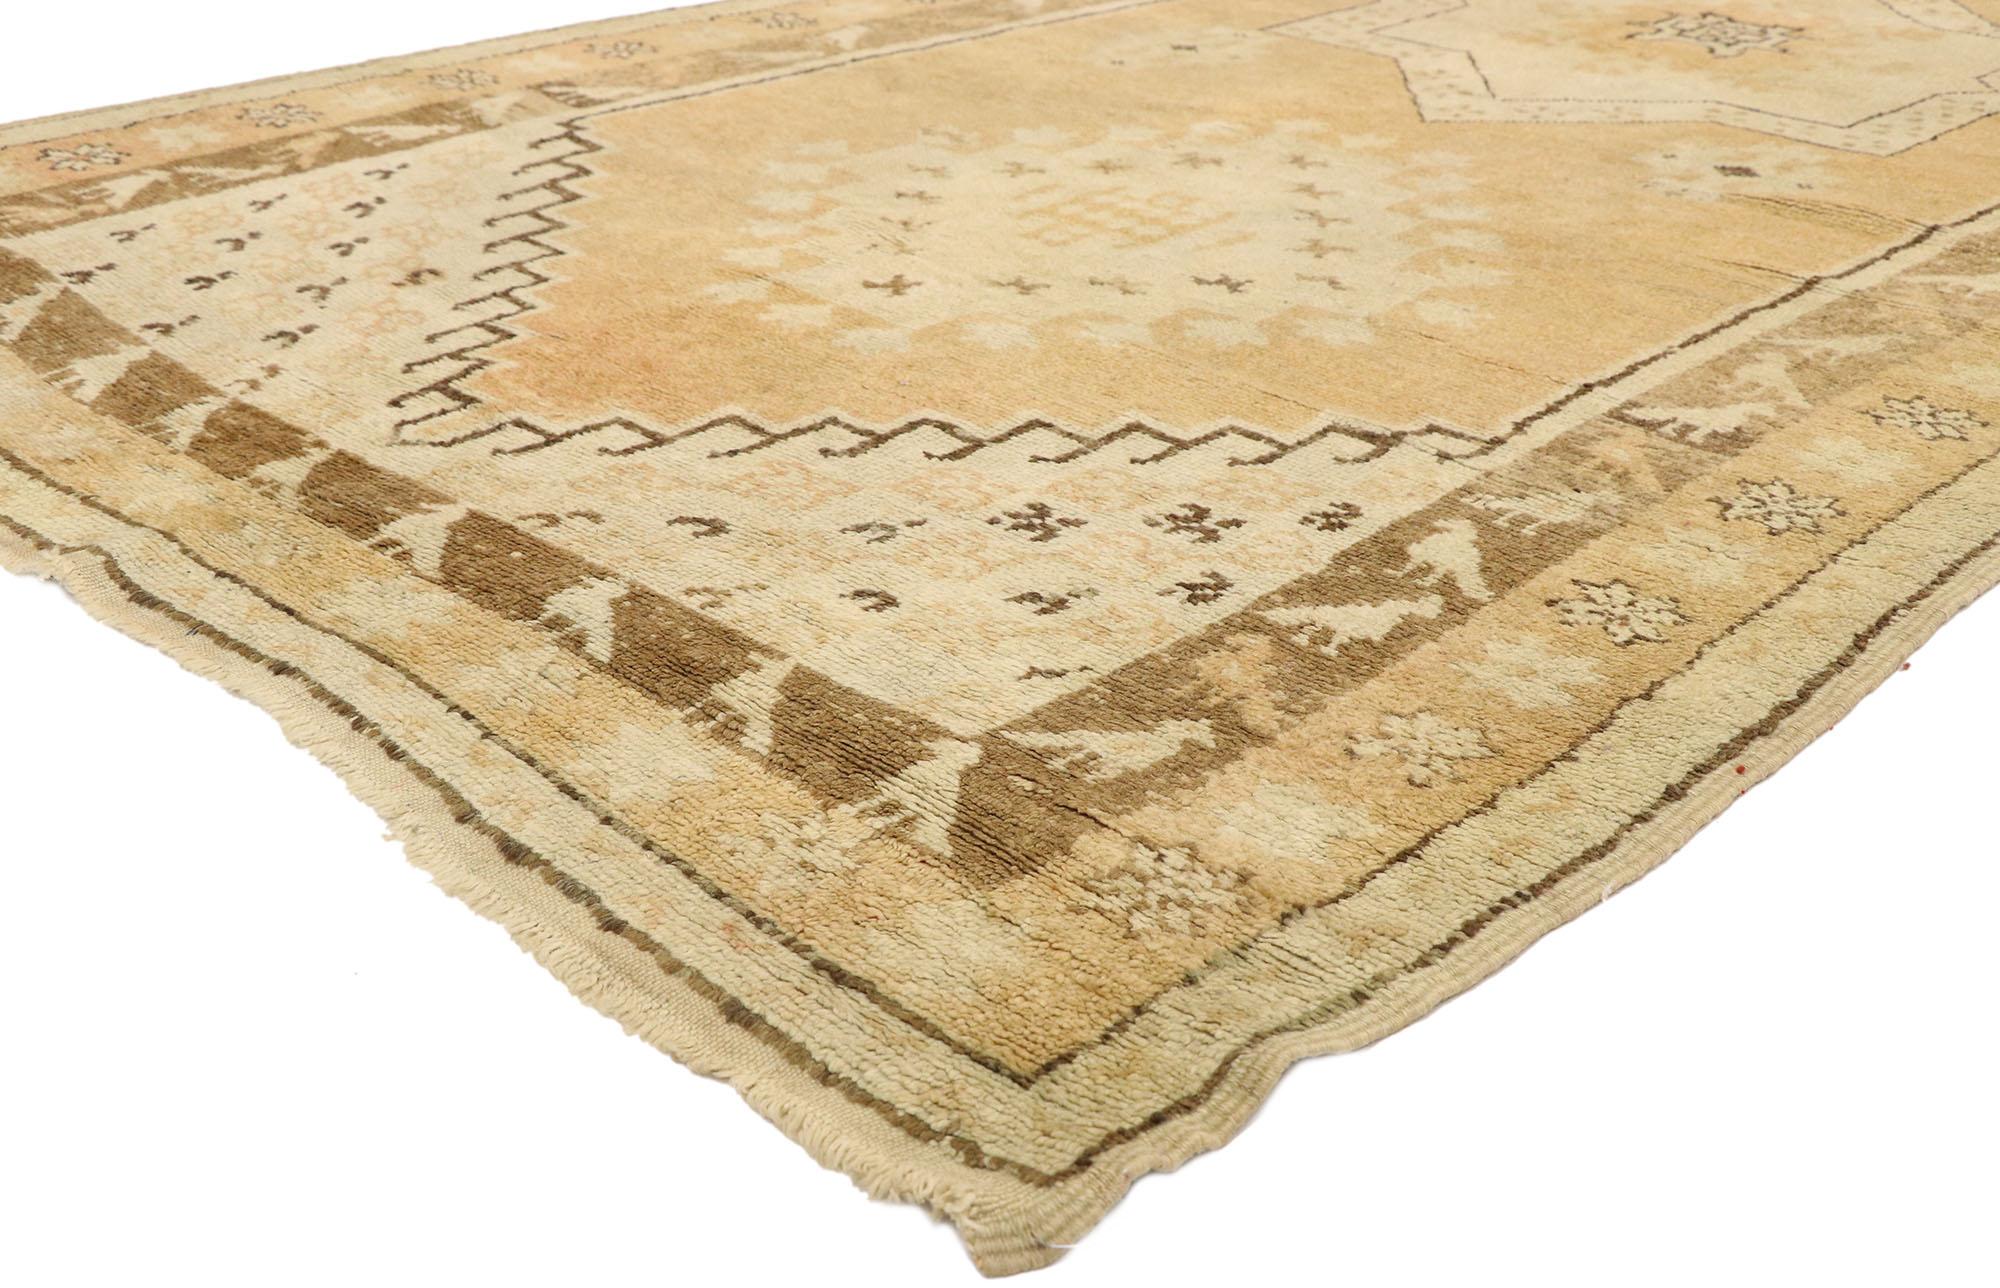 20984, vintage Berber Moroccan rug with organic modern style. This hand knotted wool vintage Berber Moroccan rug features a central eight-point star medallion flanked with a stepped diamond lozenge on either side floating in an abrashed tan and ecru